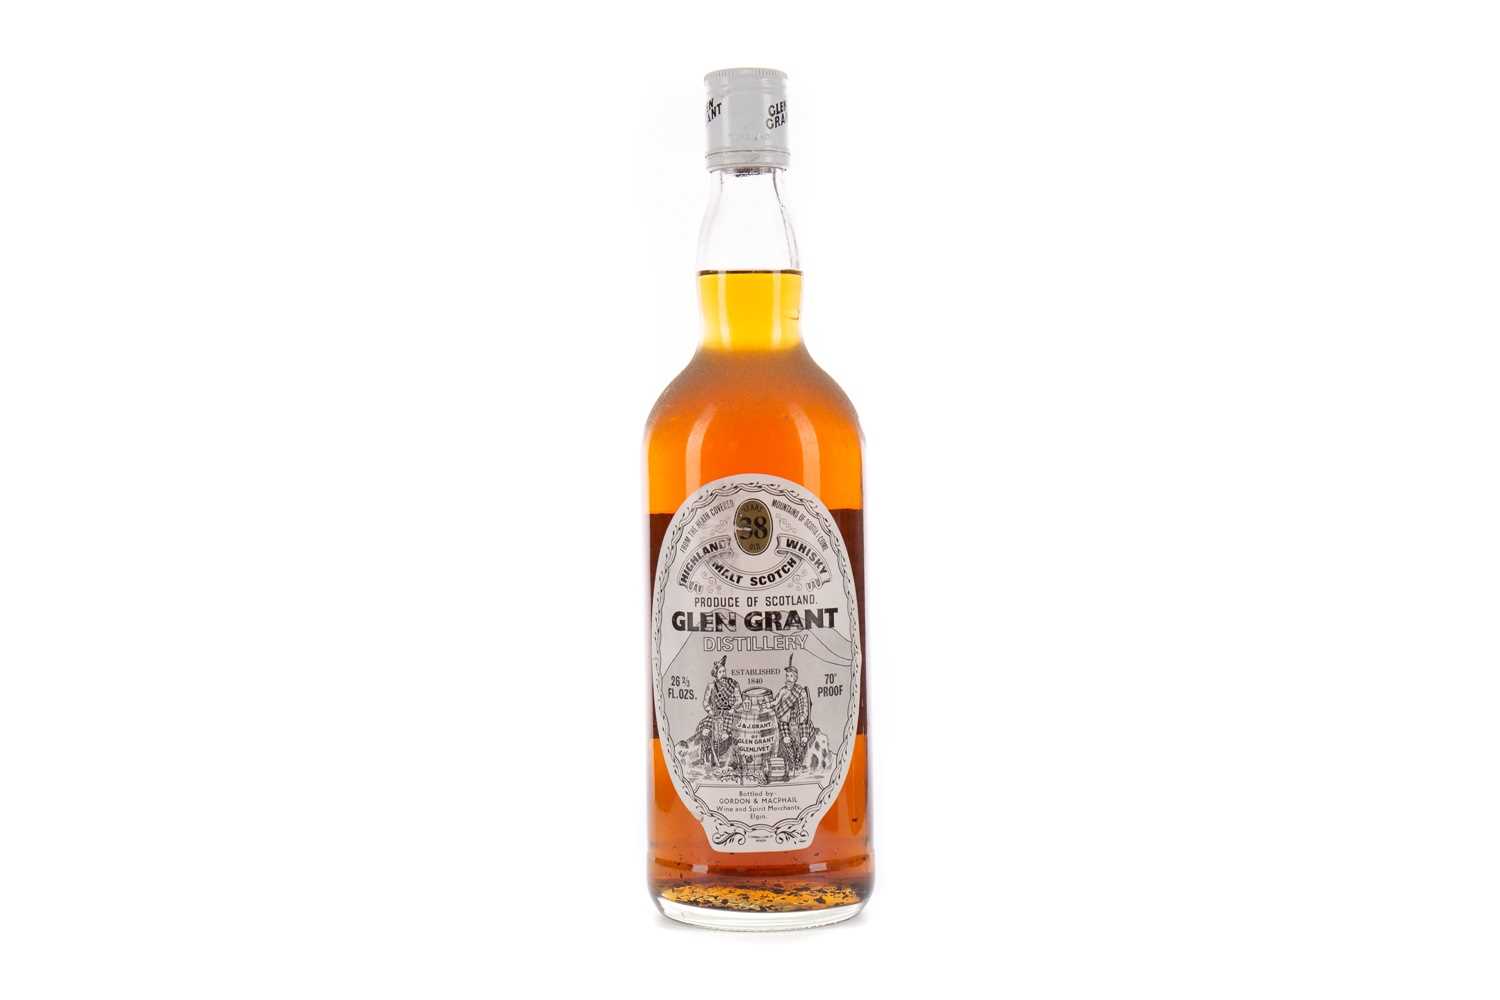 Lot 151 - GLEN GRANT 38 YEARS OLD 70° PROOF